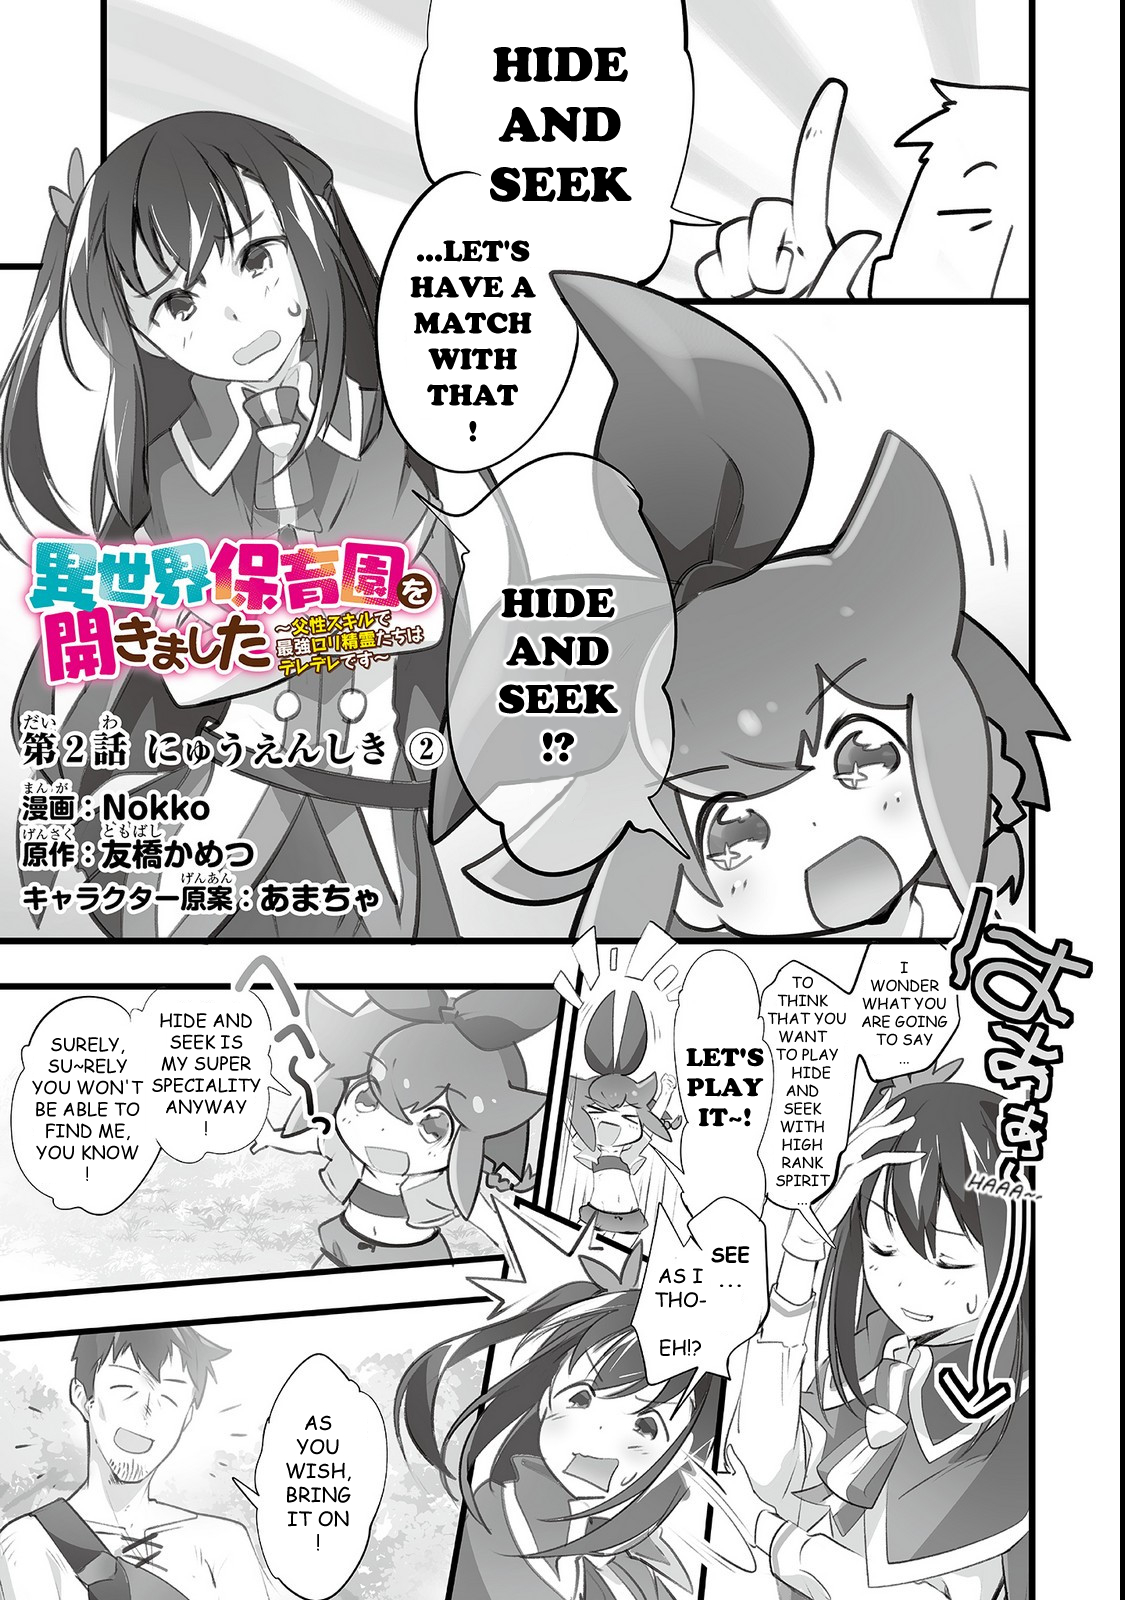 I Opened The "Different World Nursery School" ~The Strongest Loli Spirits Are Deredere By Paternity Skill~ Vol. 1 Ch. 2 Hide and Seek